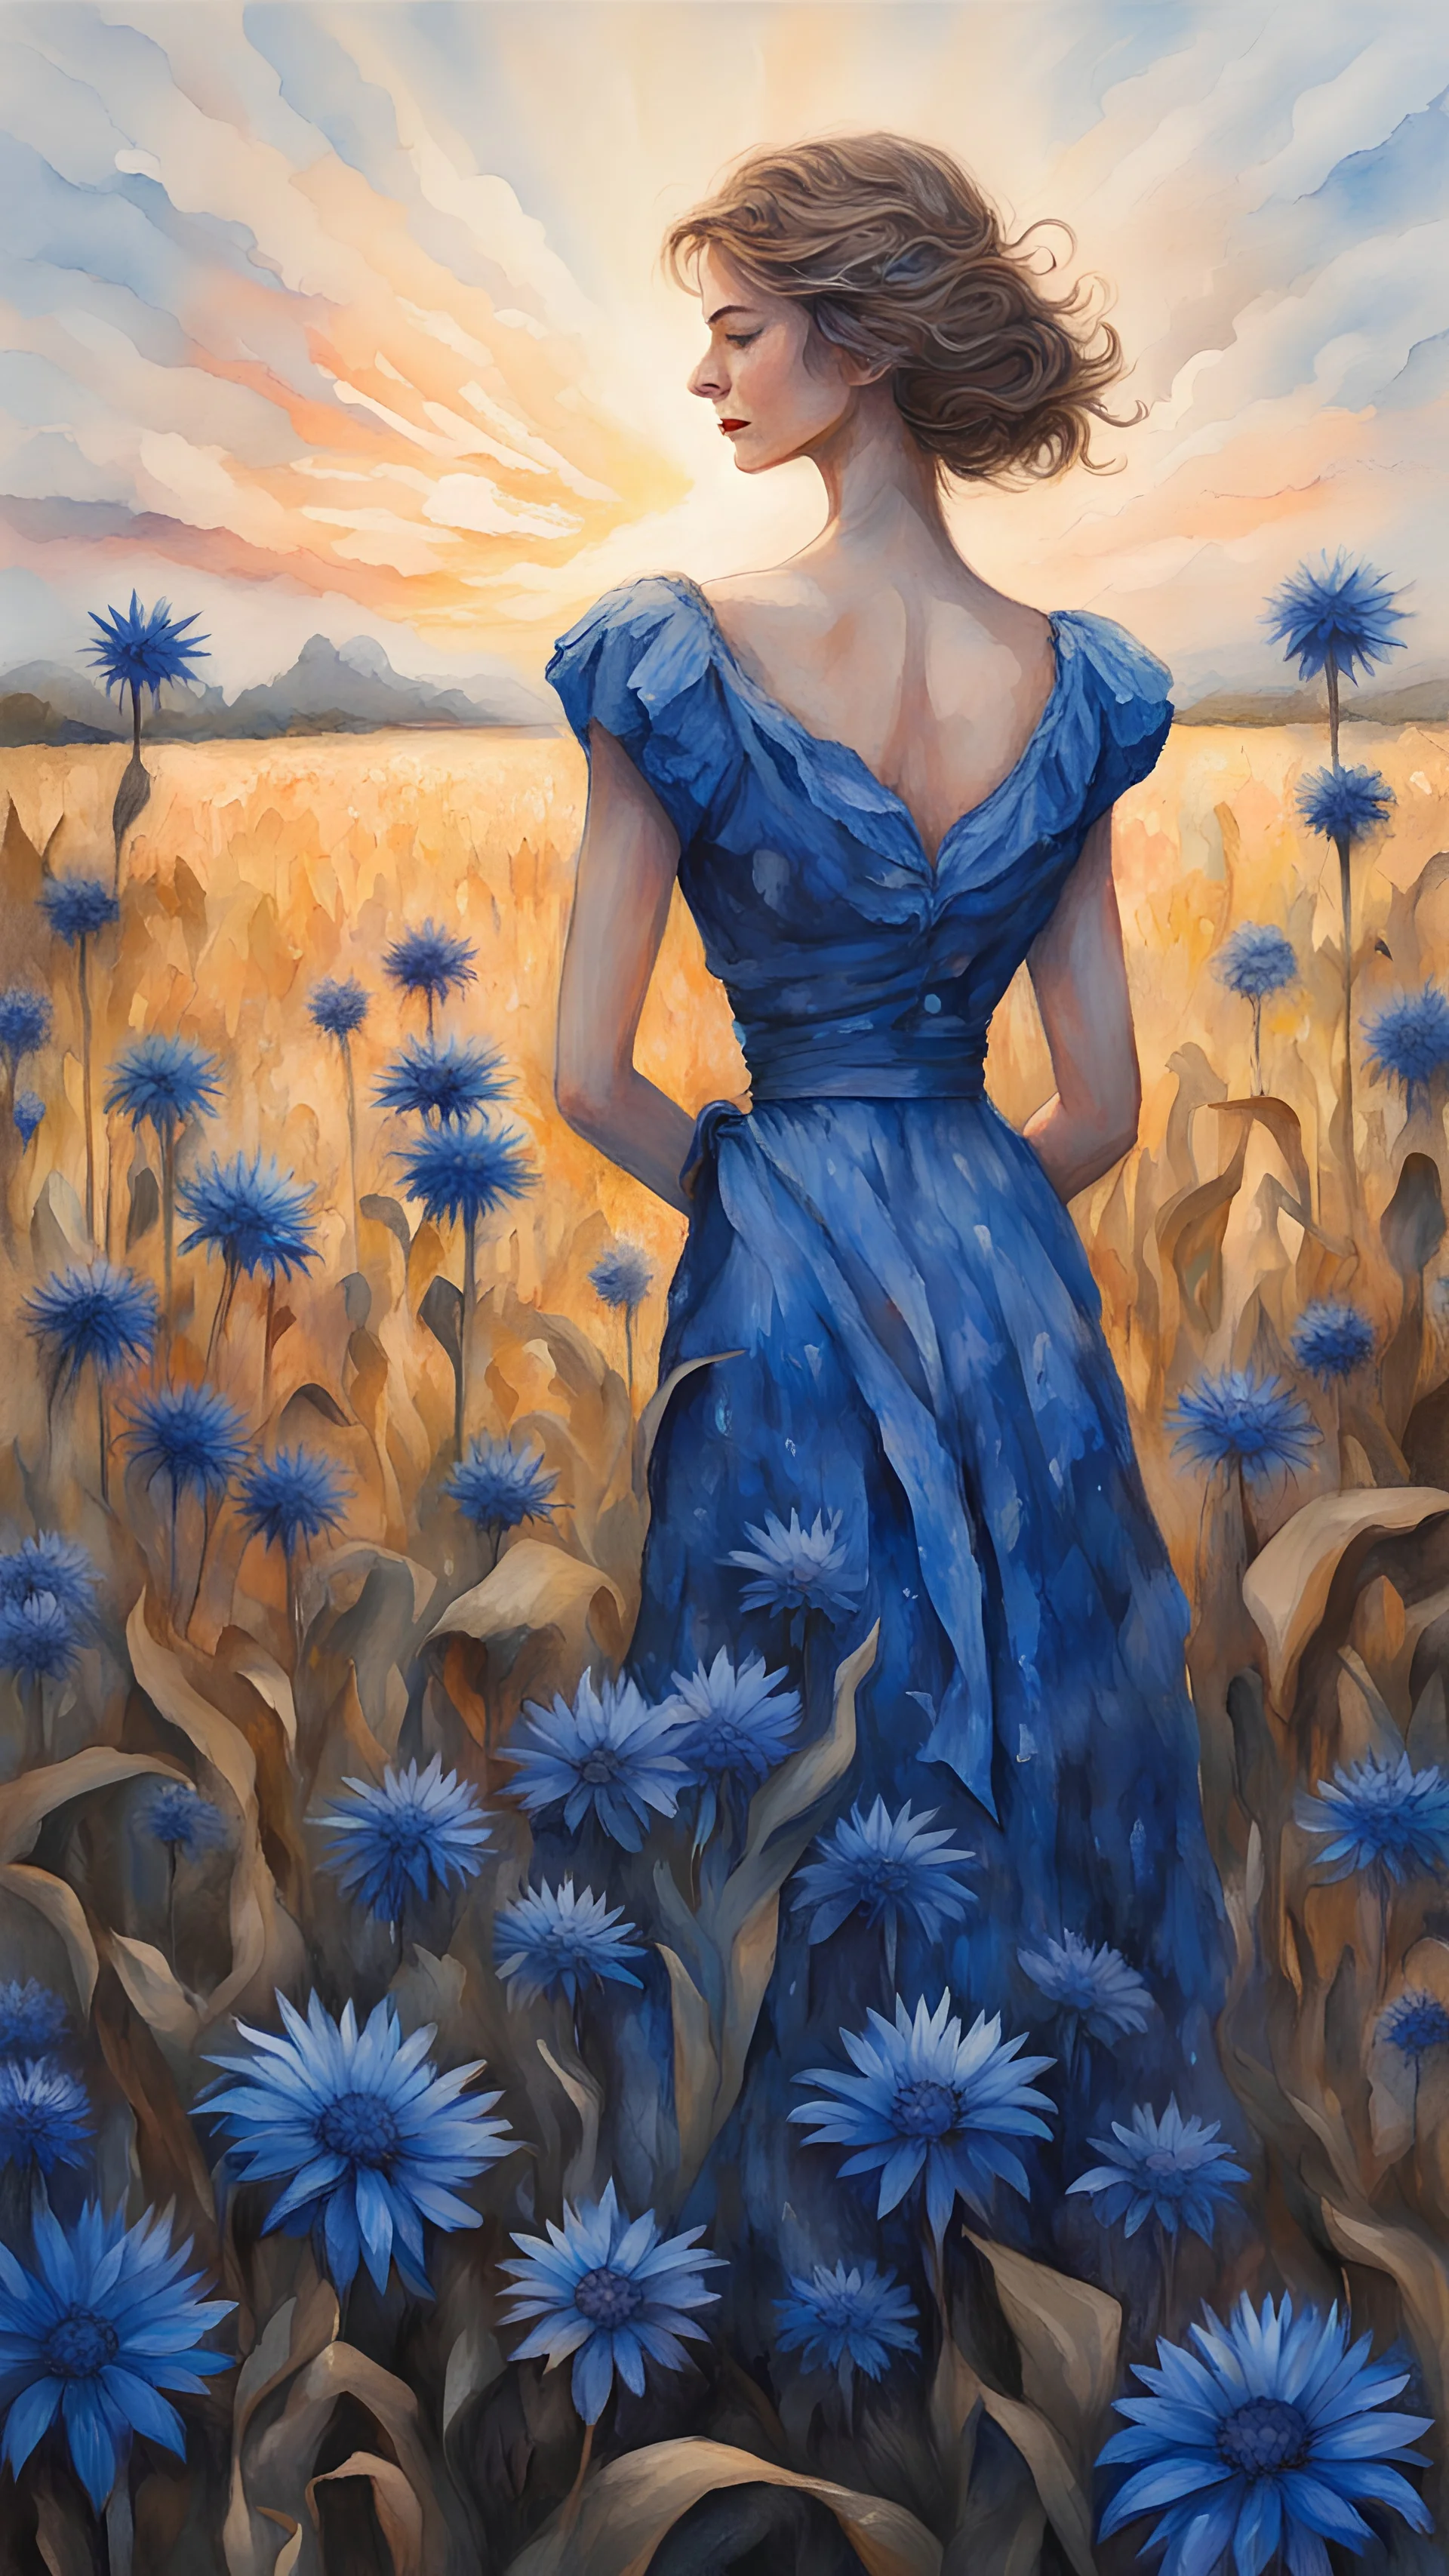 painting of a woman standing in a field of cornflowers, a fine art painting by Mandy Jurgens,figurative art, Art by Cameron Gray, summer and harvest, perfectly shaped hands and arms, best quality, ink painting, acrylic, cute cornflowers, sunrise, 2d, flat, cute, adorable, vintage, art on a cracked paper, fantasy and fairytale, storybook detailed illustration, cinematic, ultra highly detailed, tiny details, beautiful details, mystical, luminism, vibrant colors, complex background, trending on ar